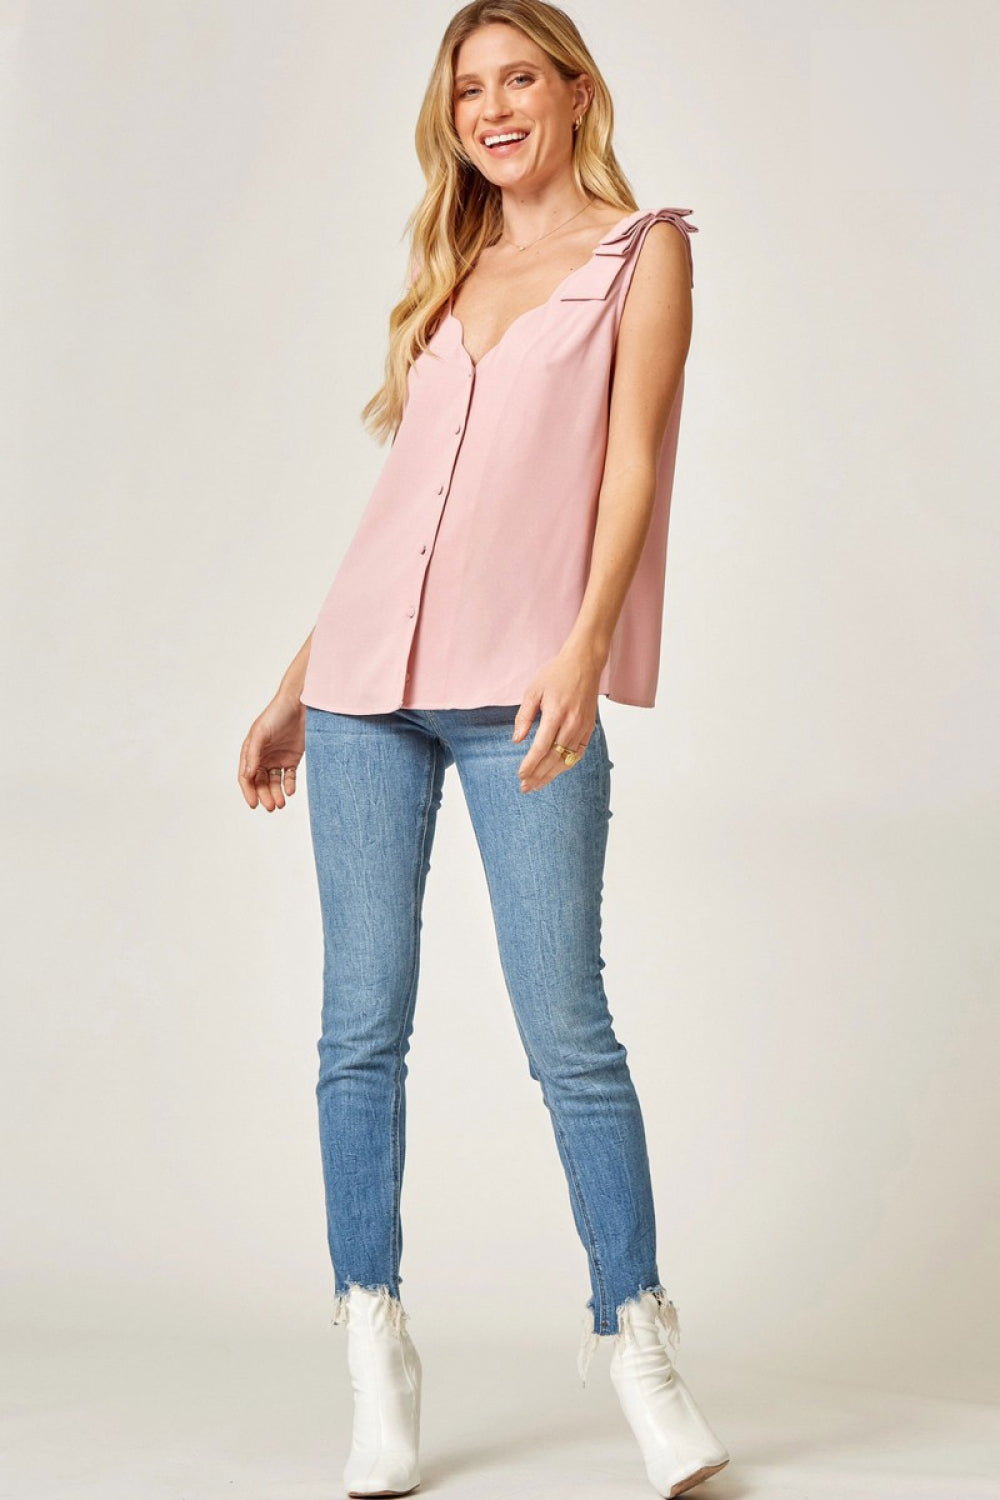 Andree by Unit Full Size Run Button Down Scalloped Edge Tank - Keene's